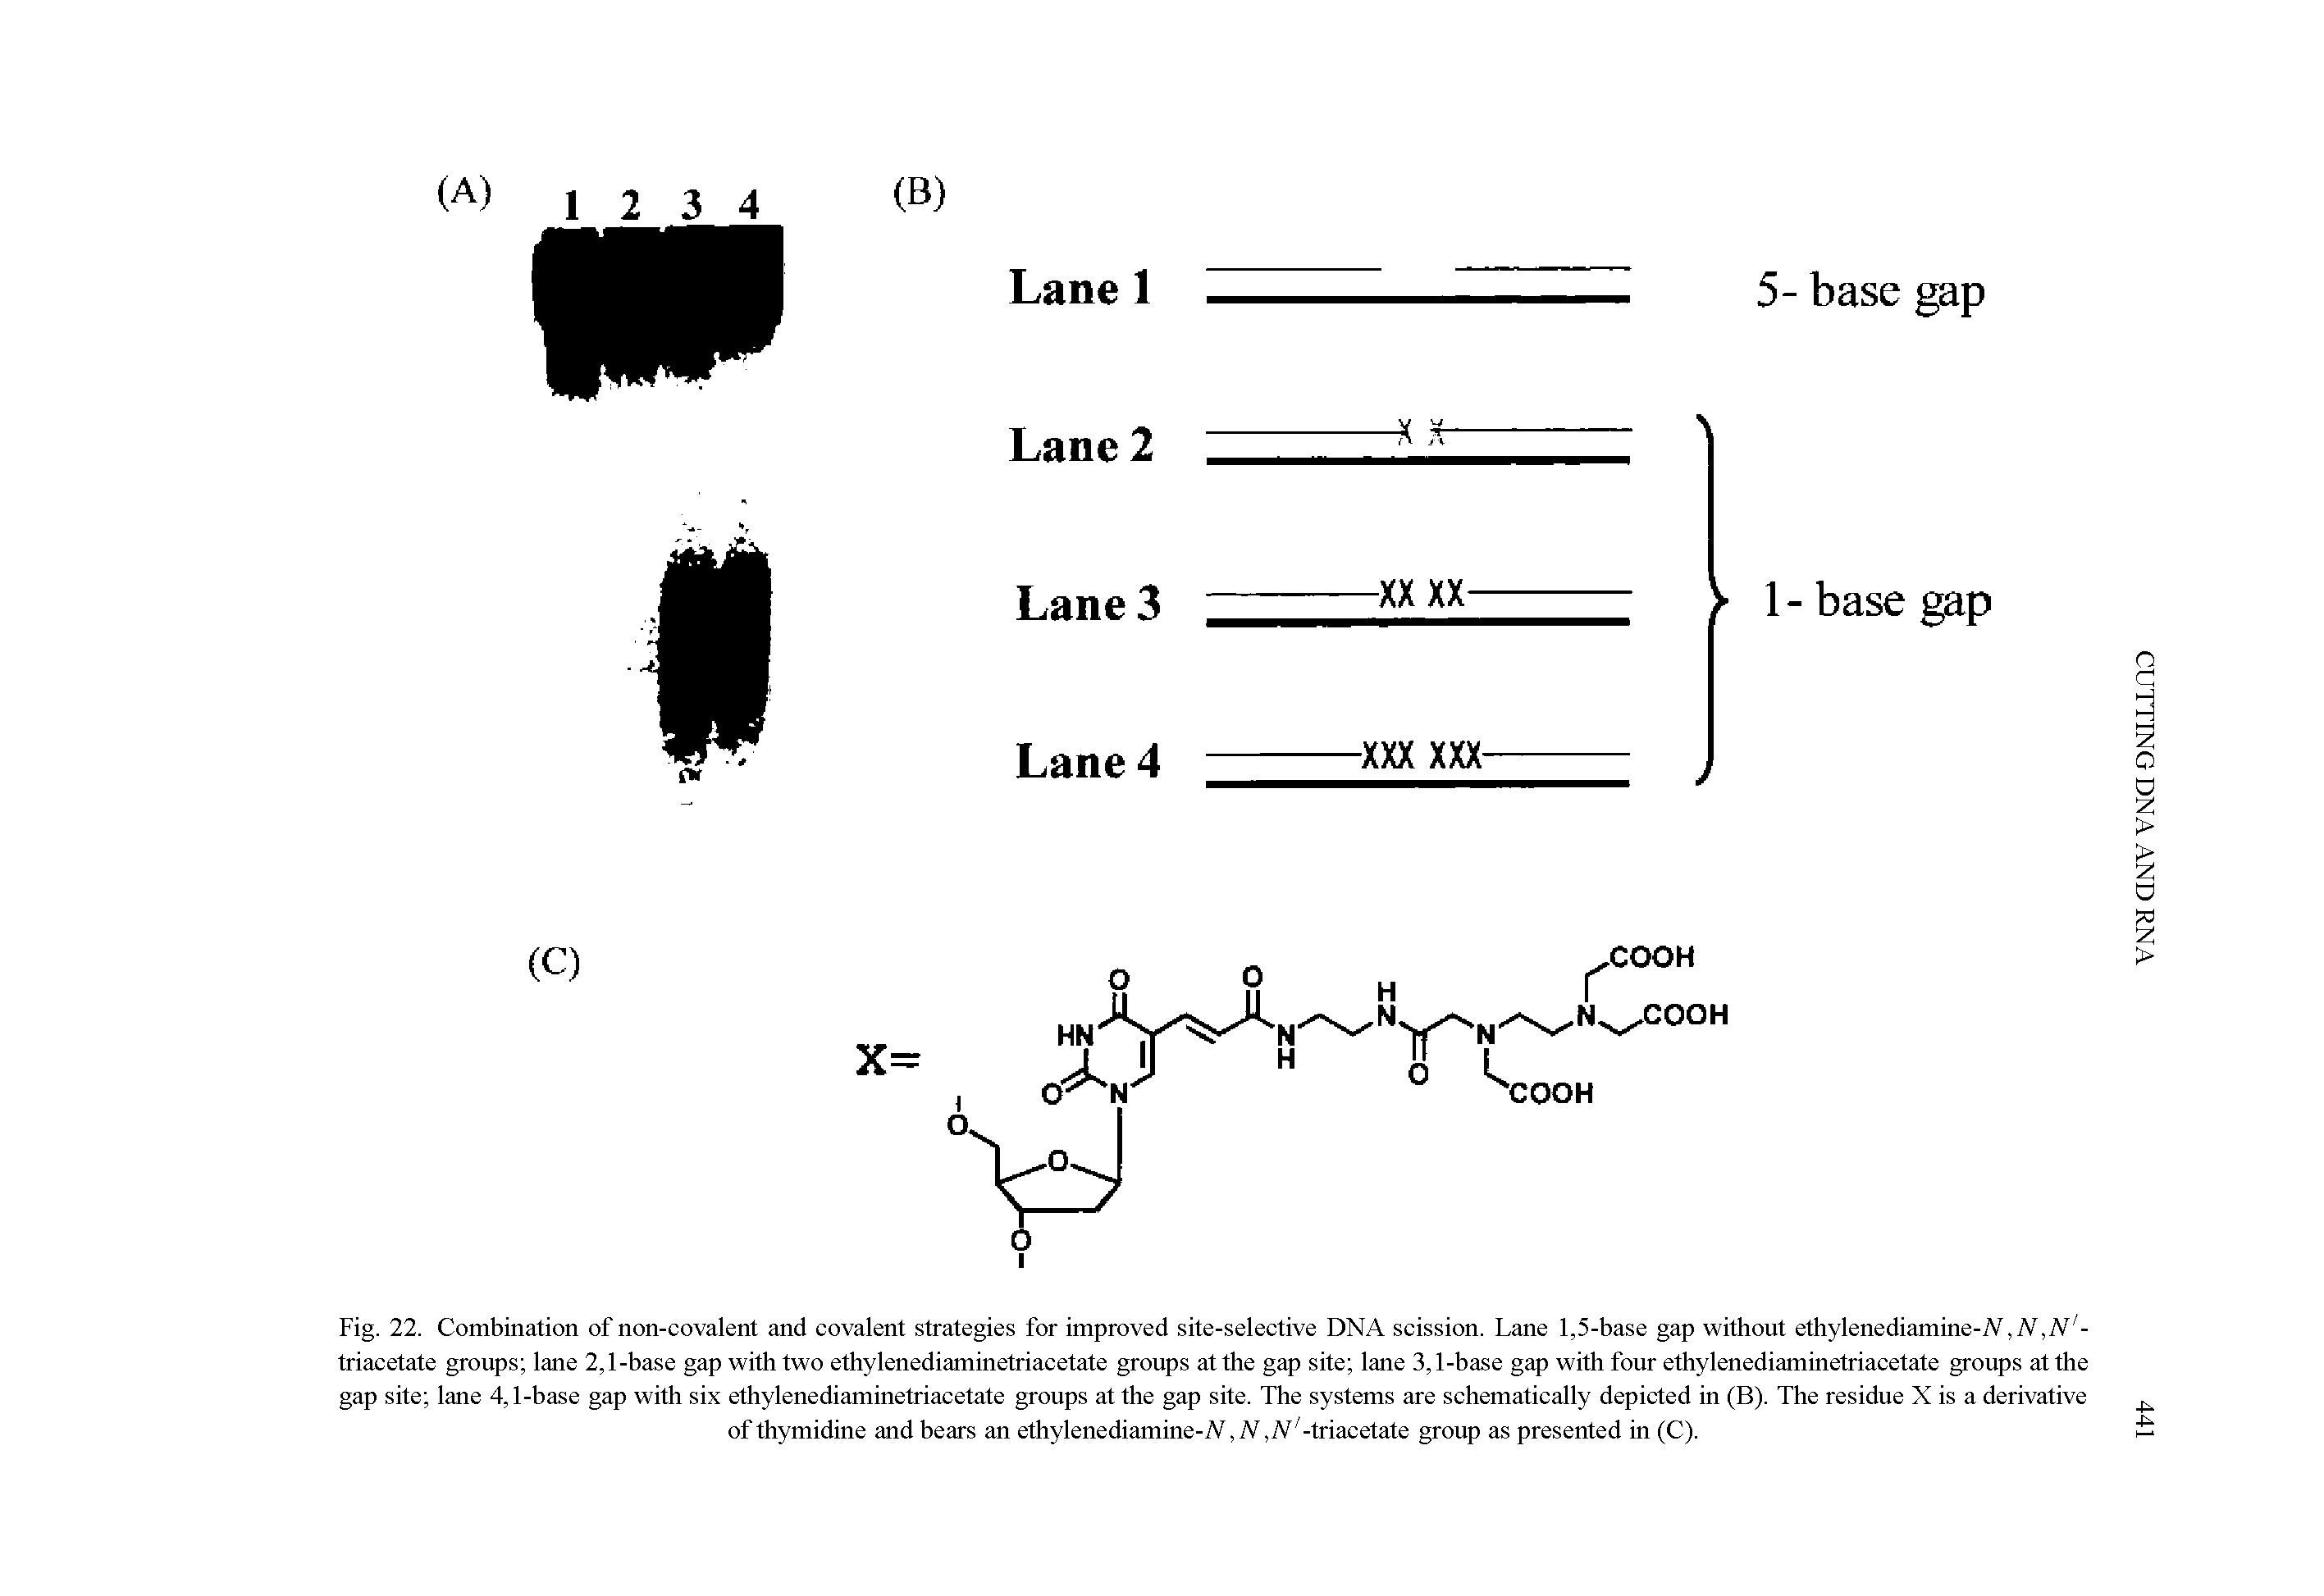 Fig. 22. Combination of non-covalent and covalent strategies for improved site-selective DNA scission. Lane 1,5-base gap without ethylenediamine-A, triacetate groups lane 2,1-base gap with two ethylenediaminetriacetate groups at the gap site lane 3,1-base gap with four ethylenediaminetriacetate groups at the gap site lane 4,1-base gap with six ethylenediaminetriacetate groups at the gap site. The systems are schematically depicted in (B). The residue X is a derivative...